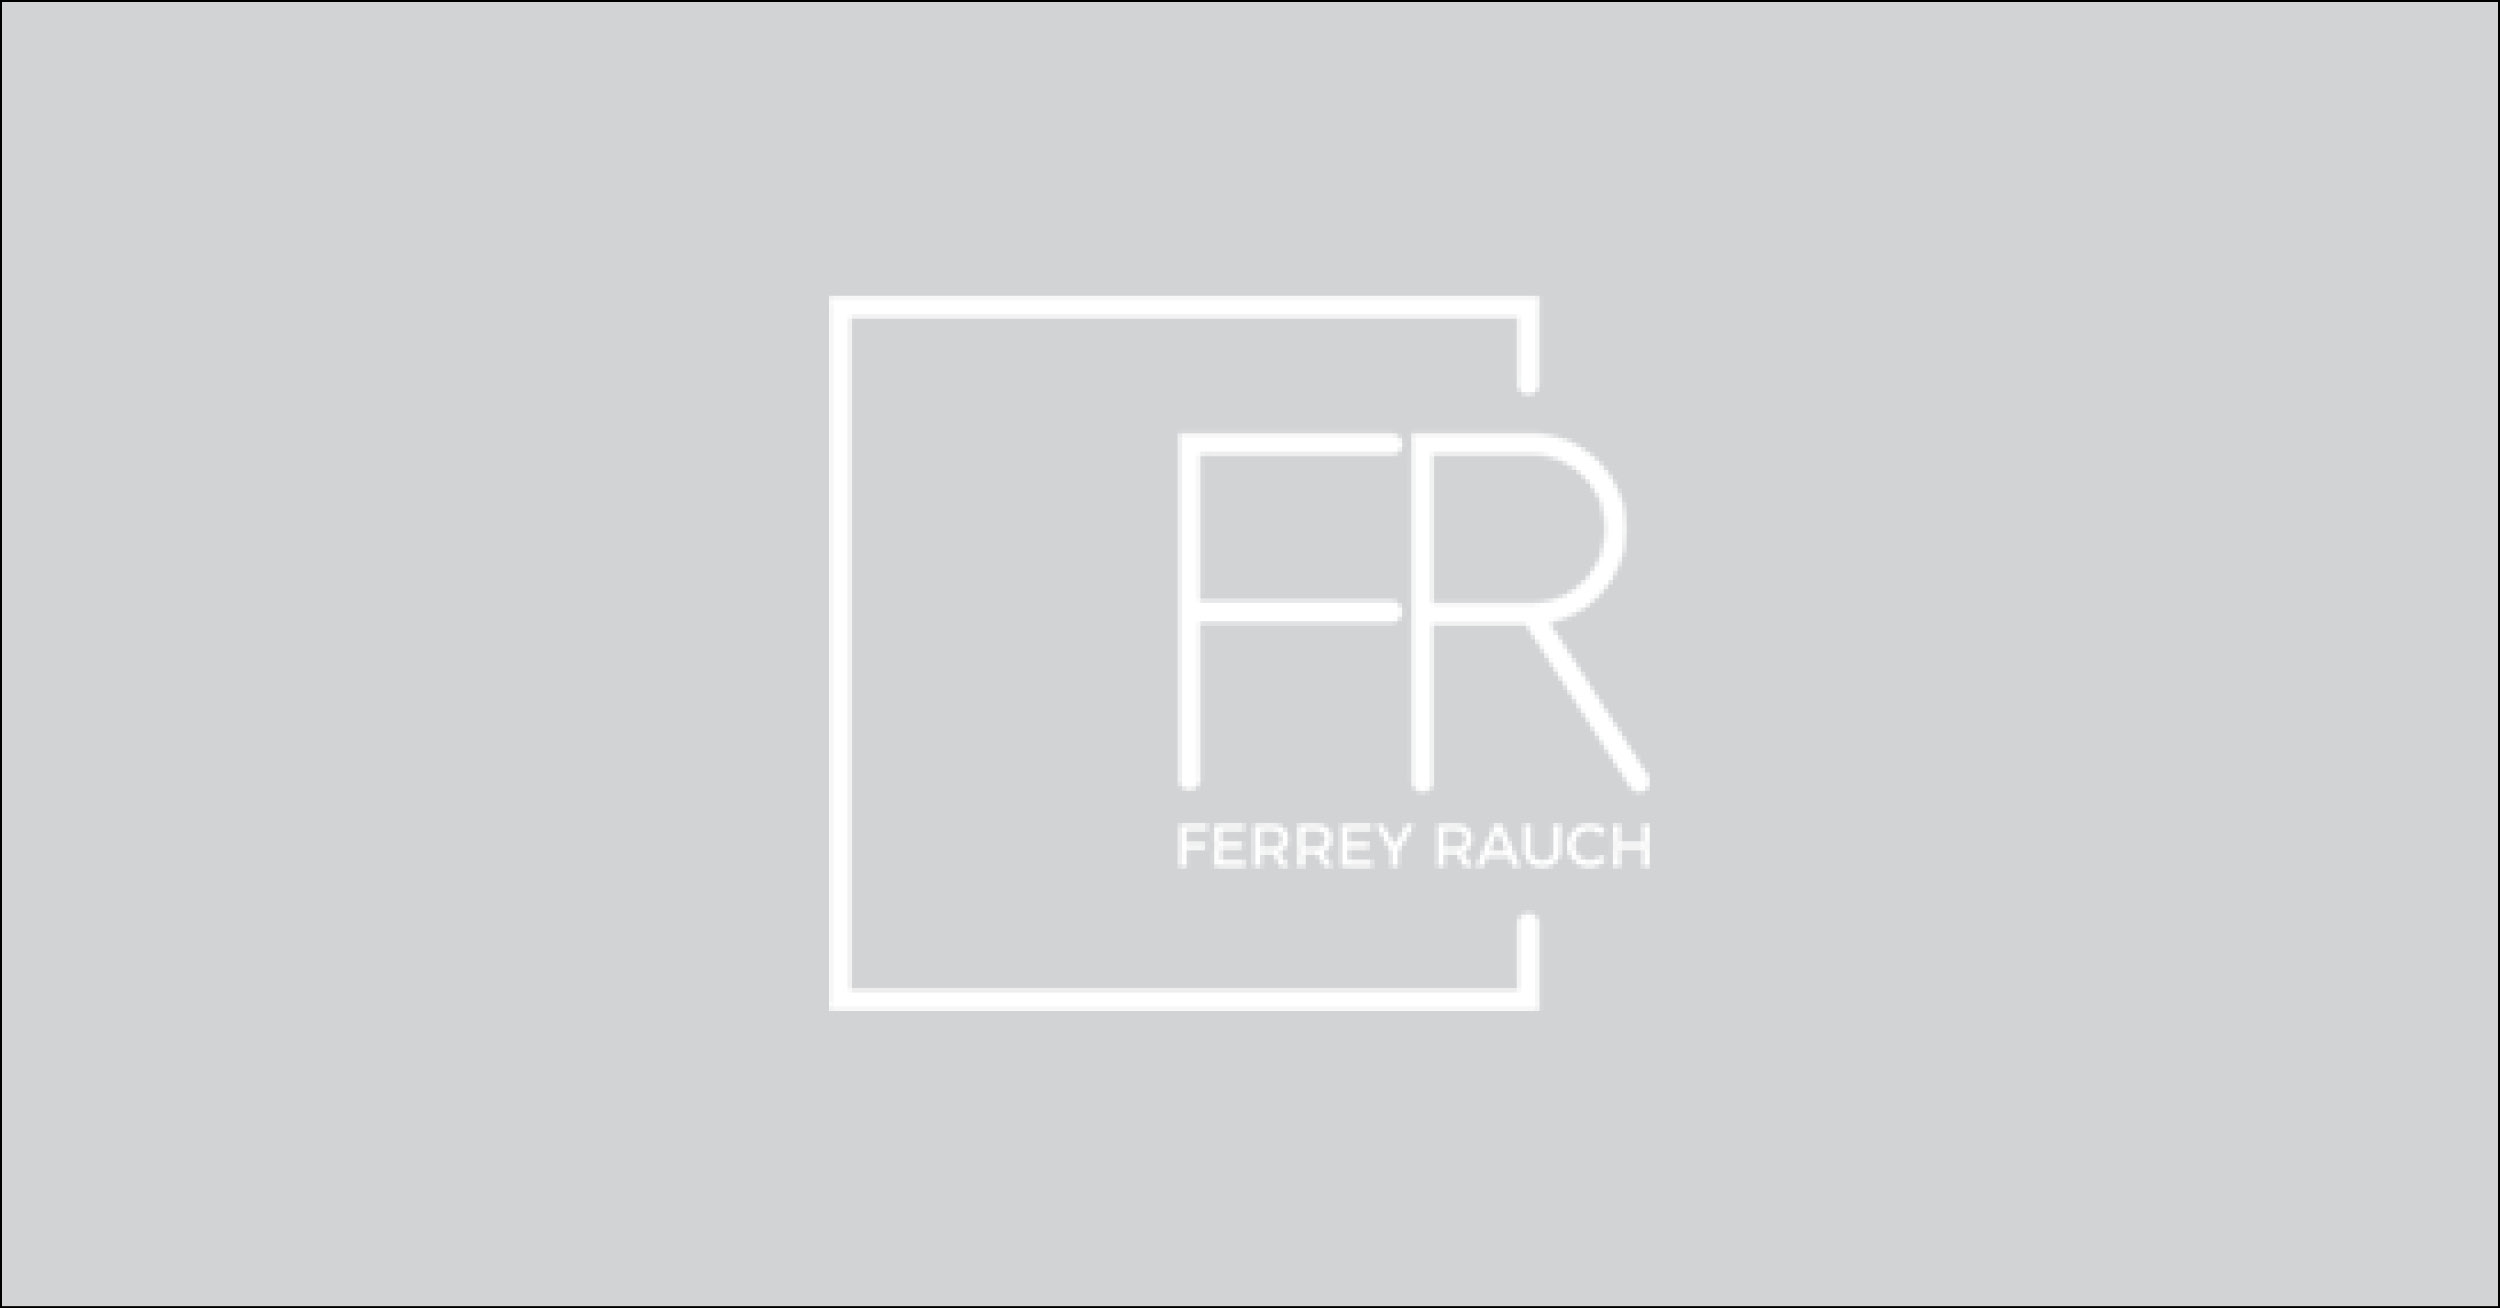 Find new construction or search for new homes and communities by FR Development or Ferrey Rauch in Colorado